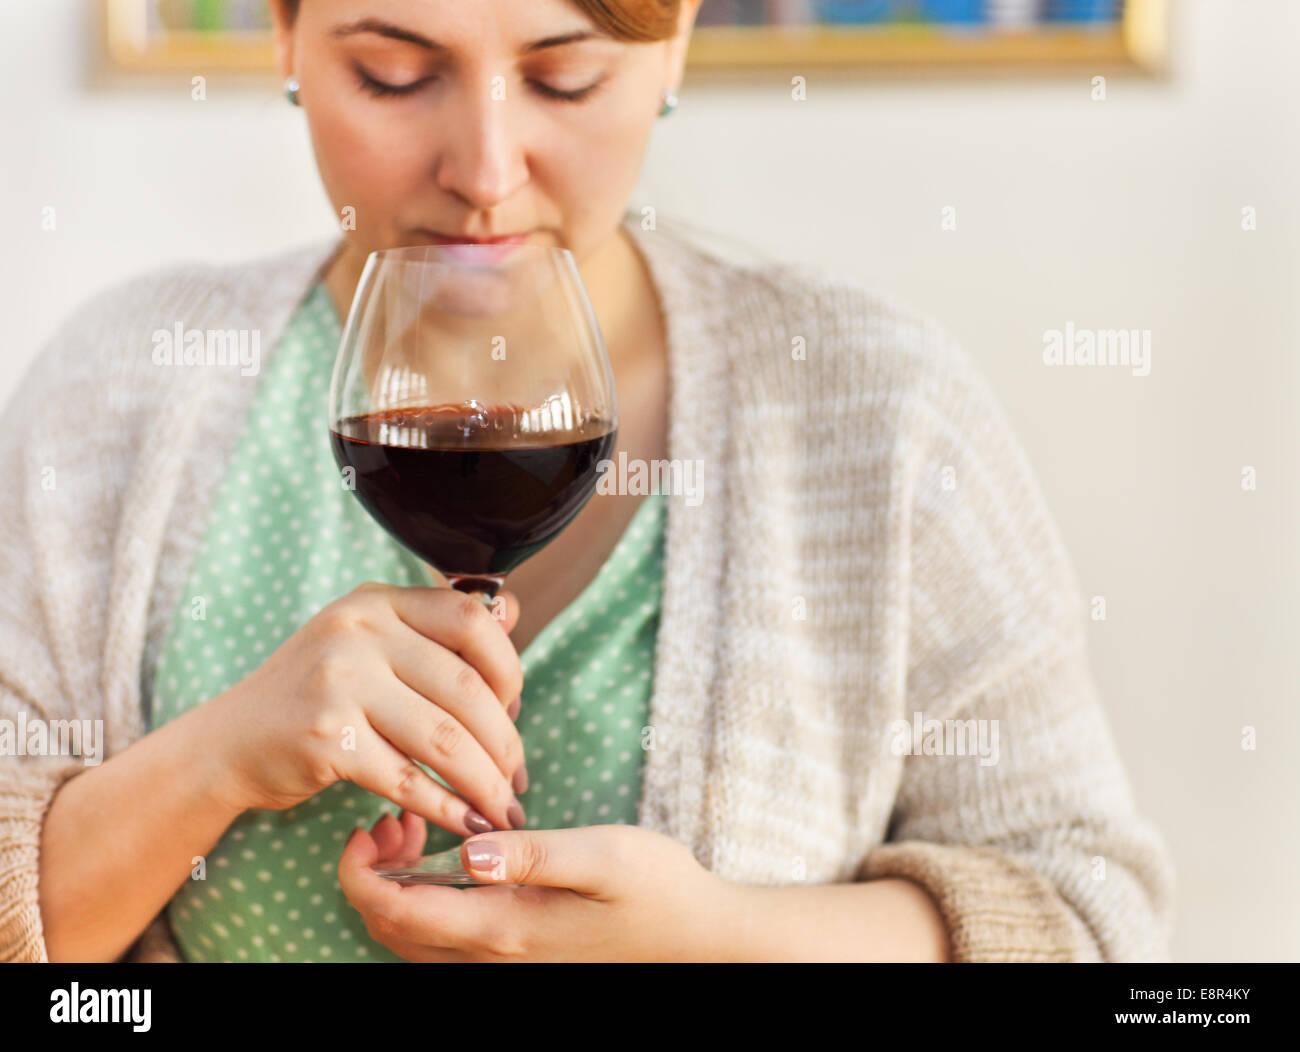 Closeup portrait of young woman drinking red wine with eyes closed ...